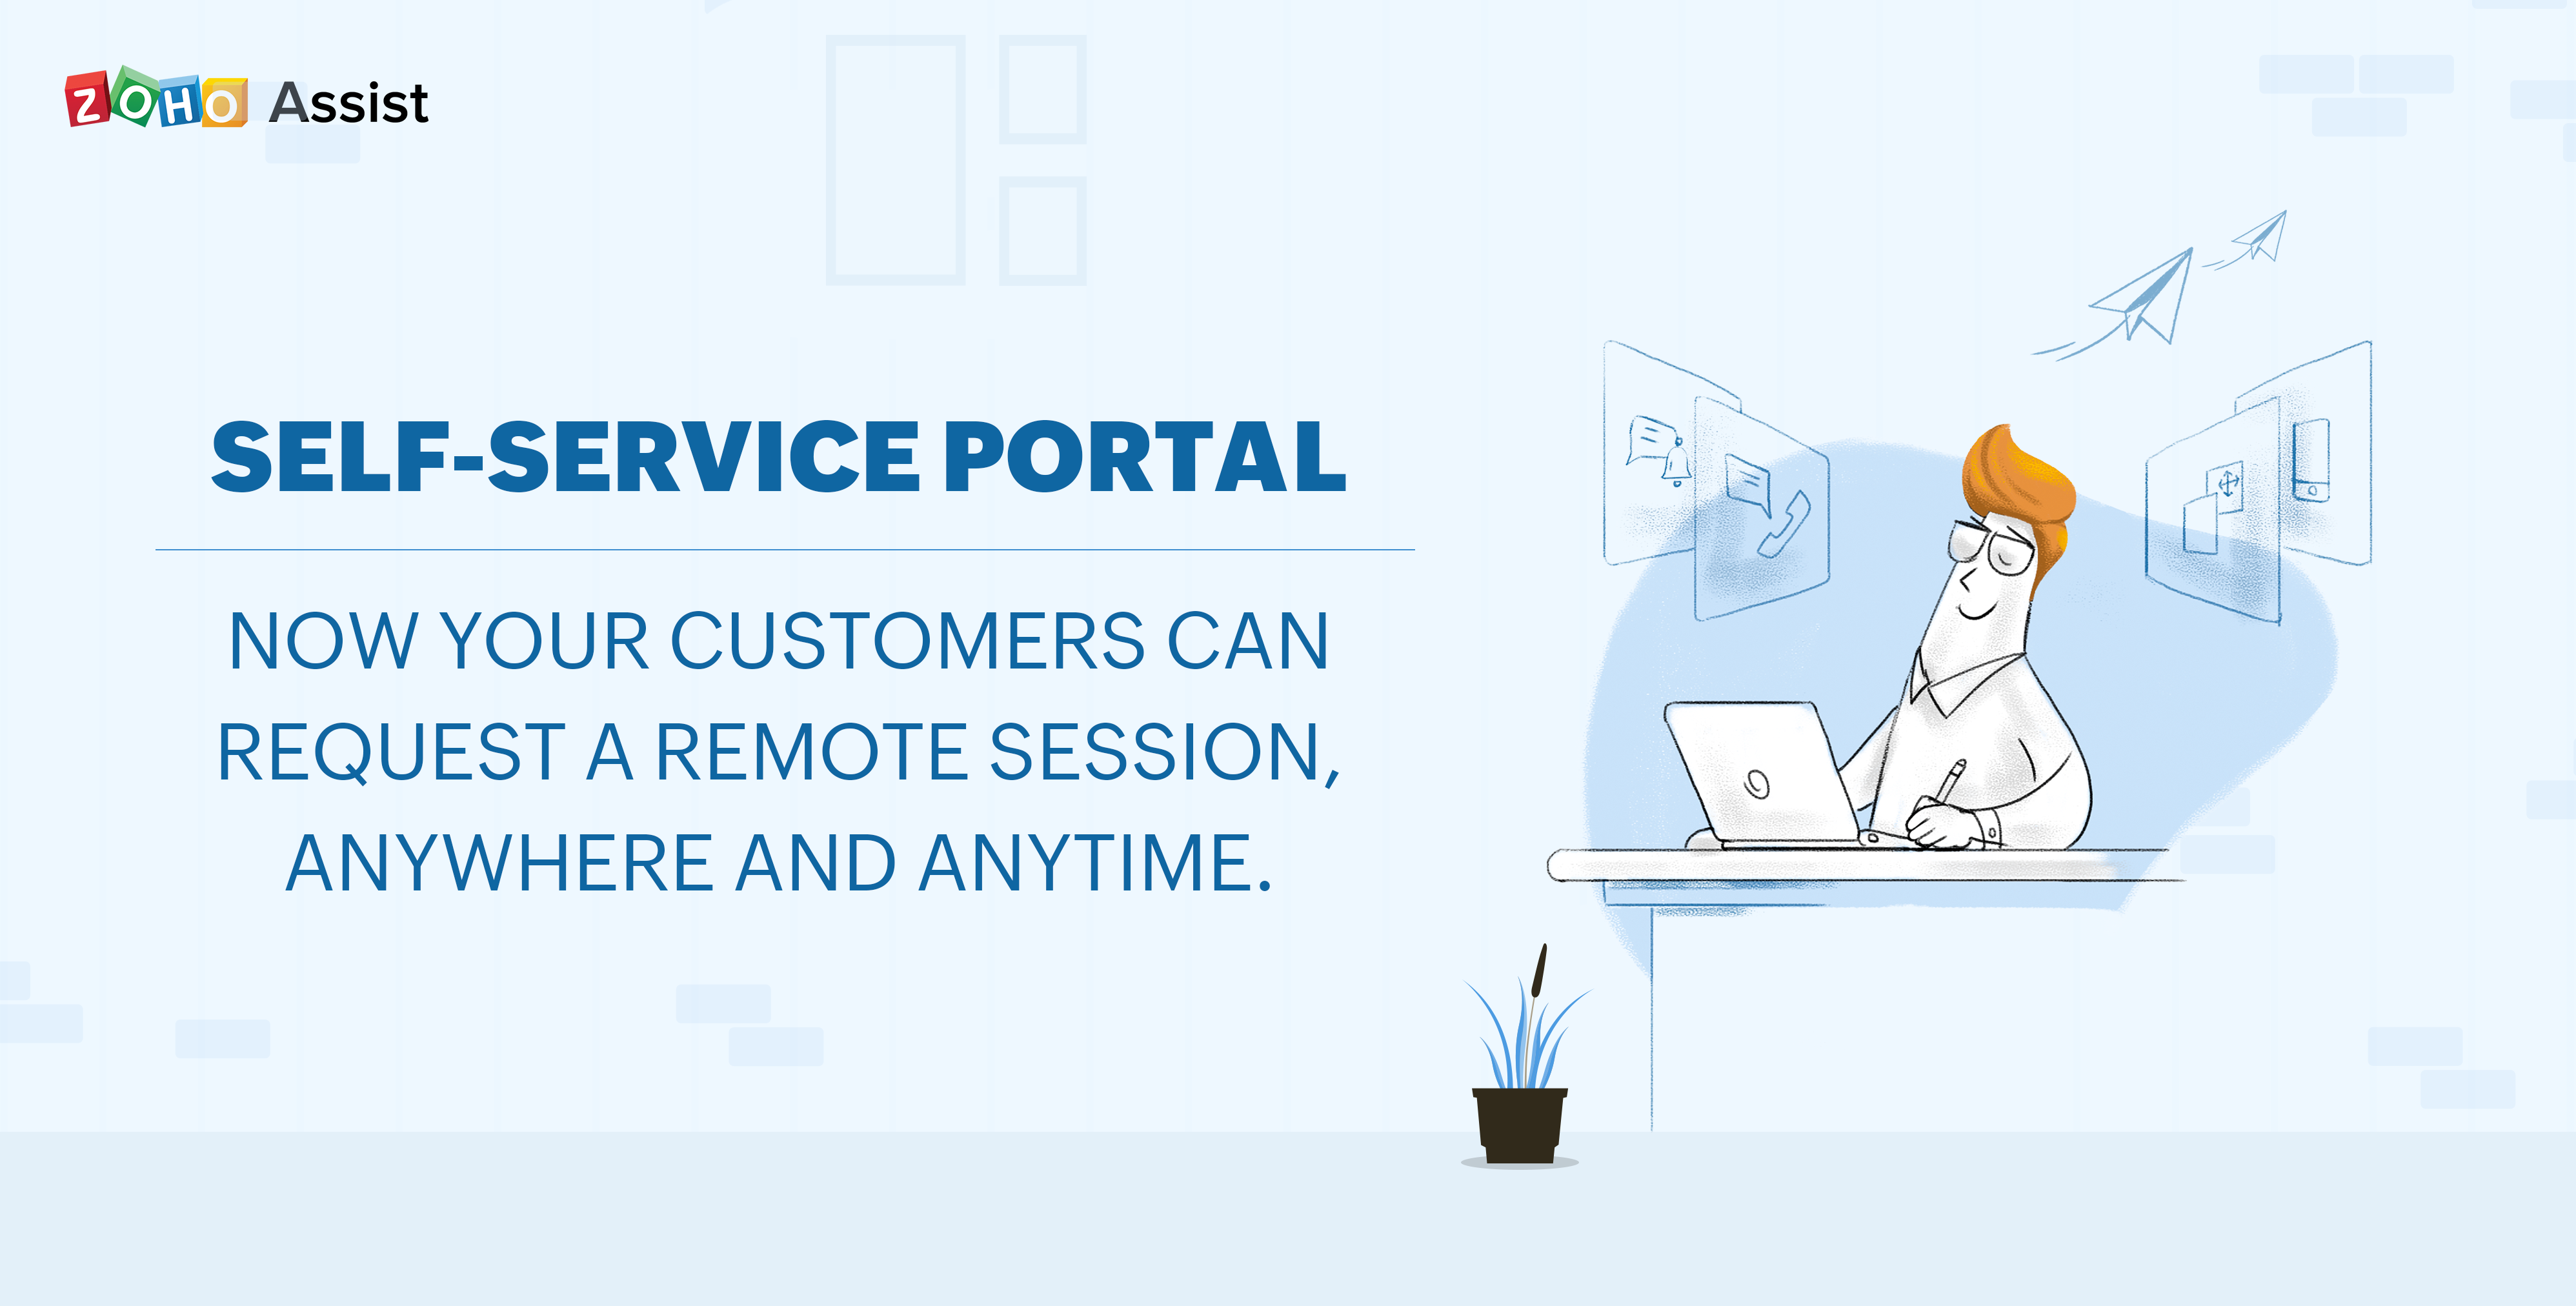 Introducing Zoho Assist's Self-Service Portal: Remote Support at Your Customer's Fingertips.